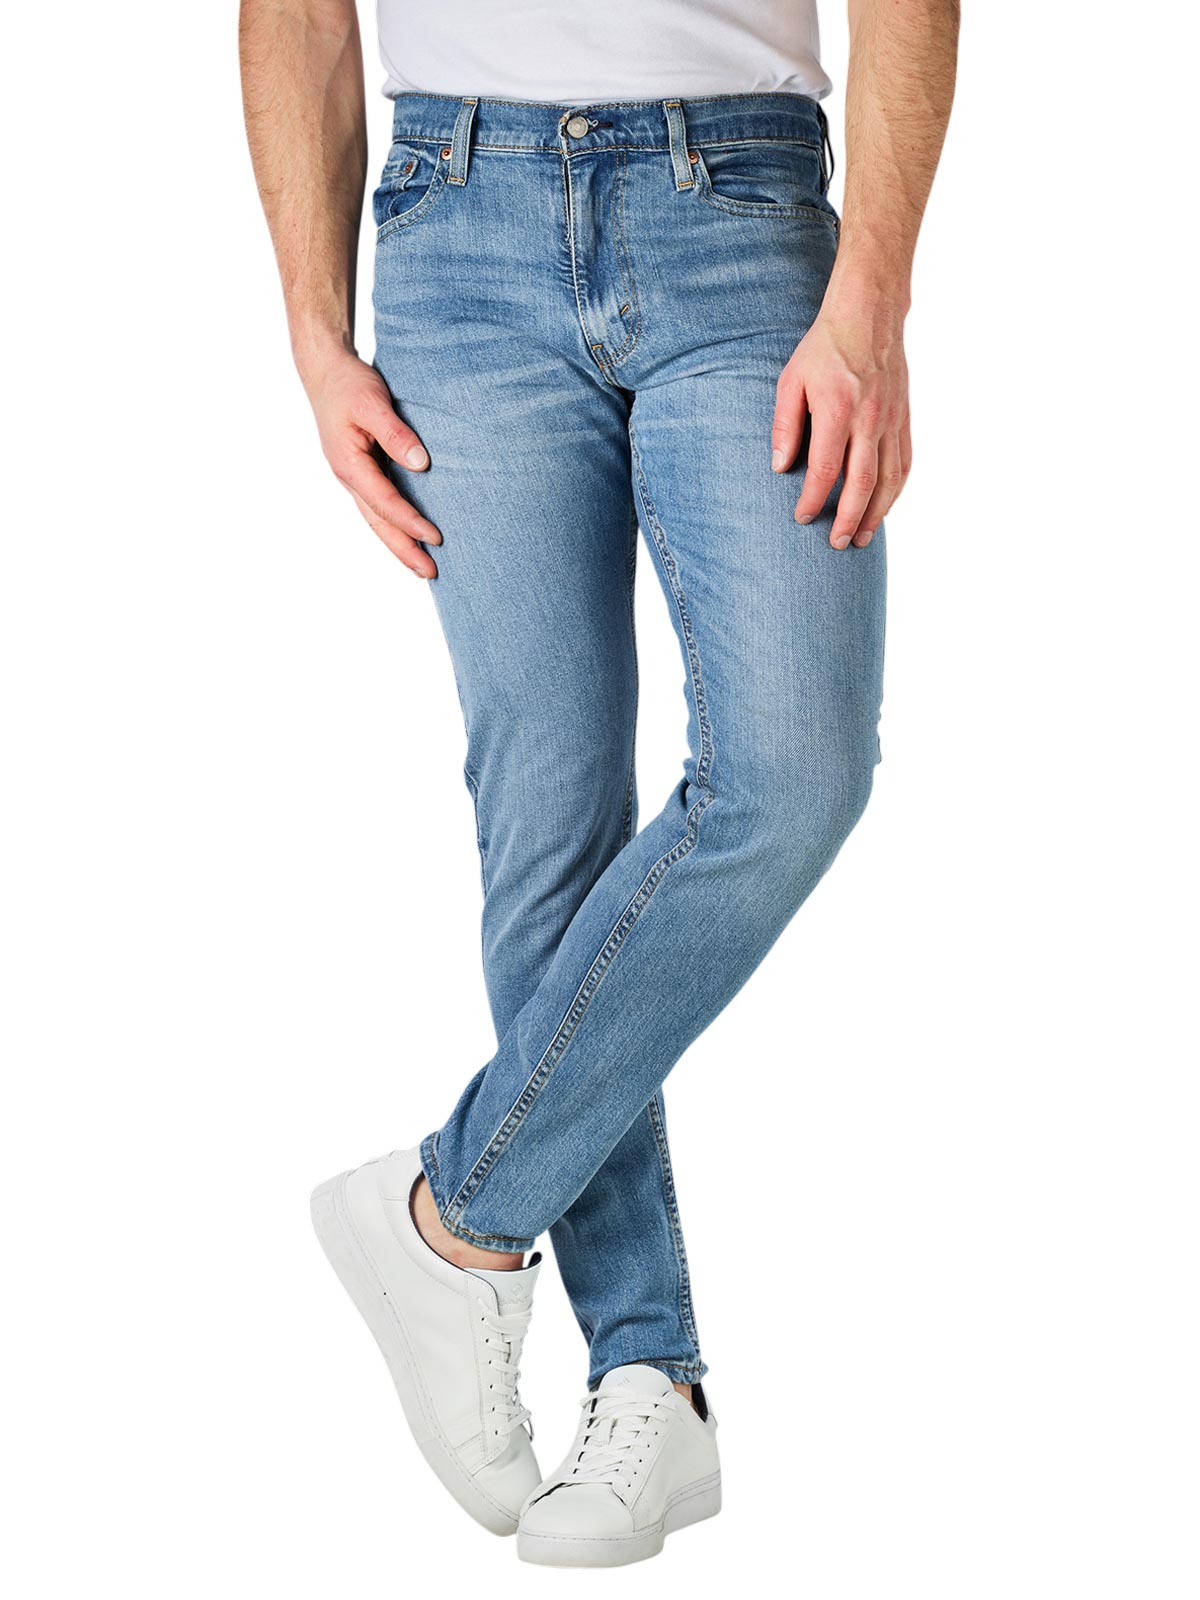 Levi's 512 Jeans Slim Fit Worn To Ride Levi's Men's Jeans | Free Shipping  on  - SIMPLY LOOK GOOD